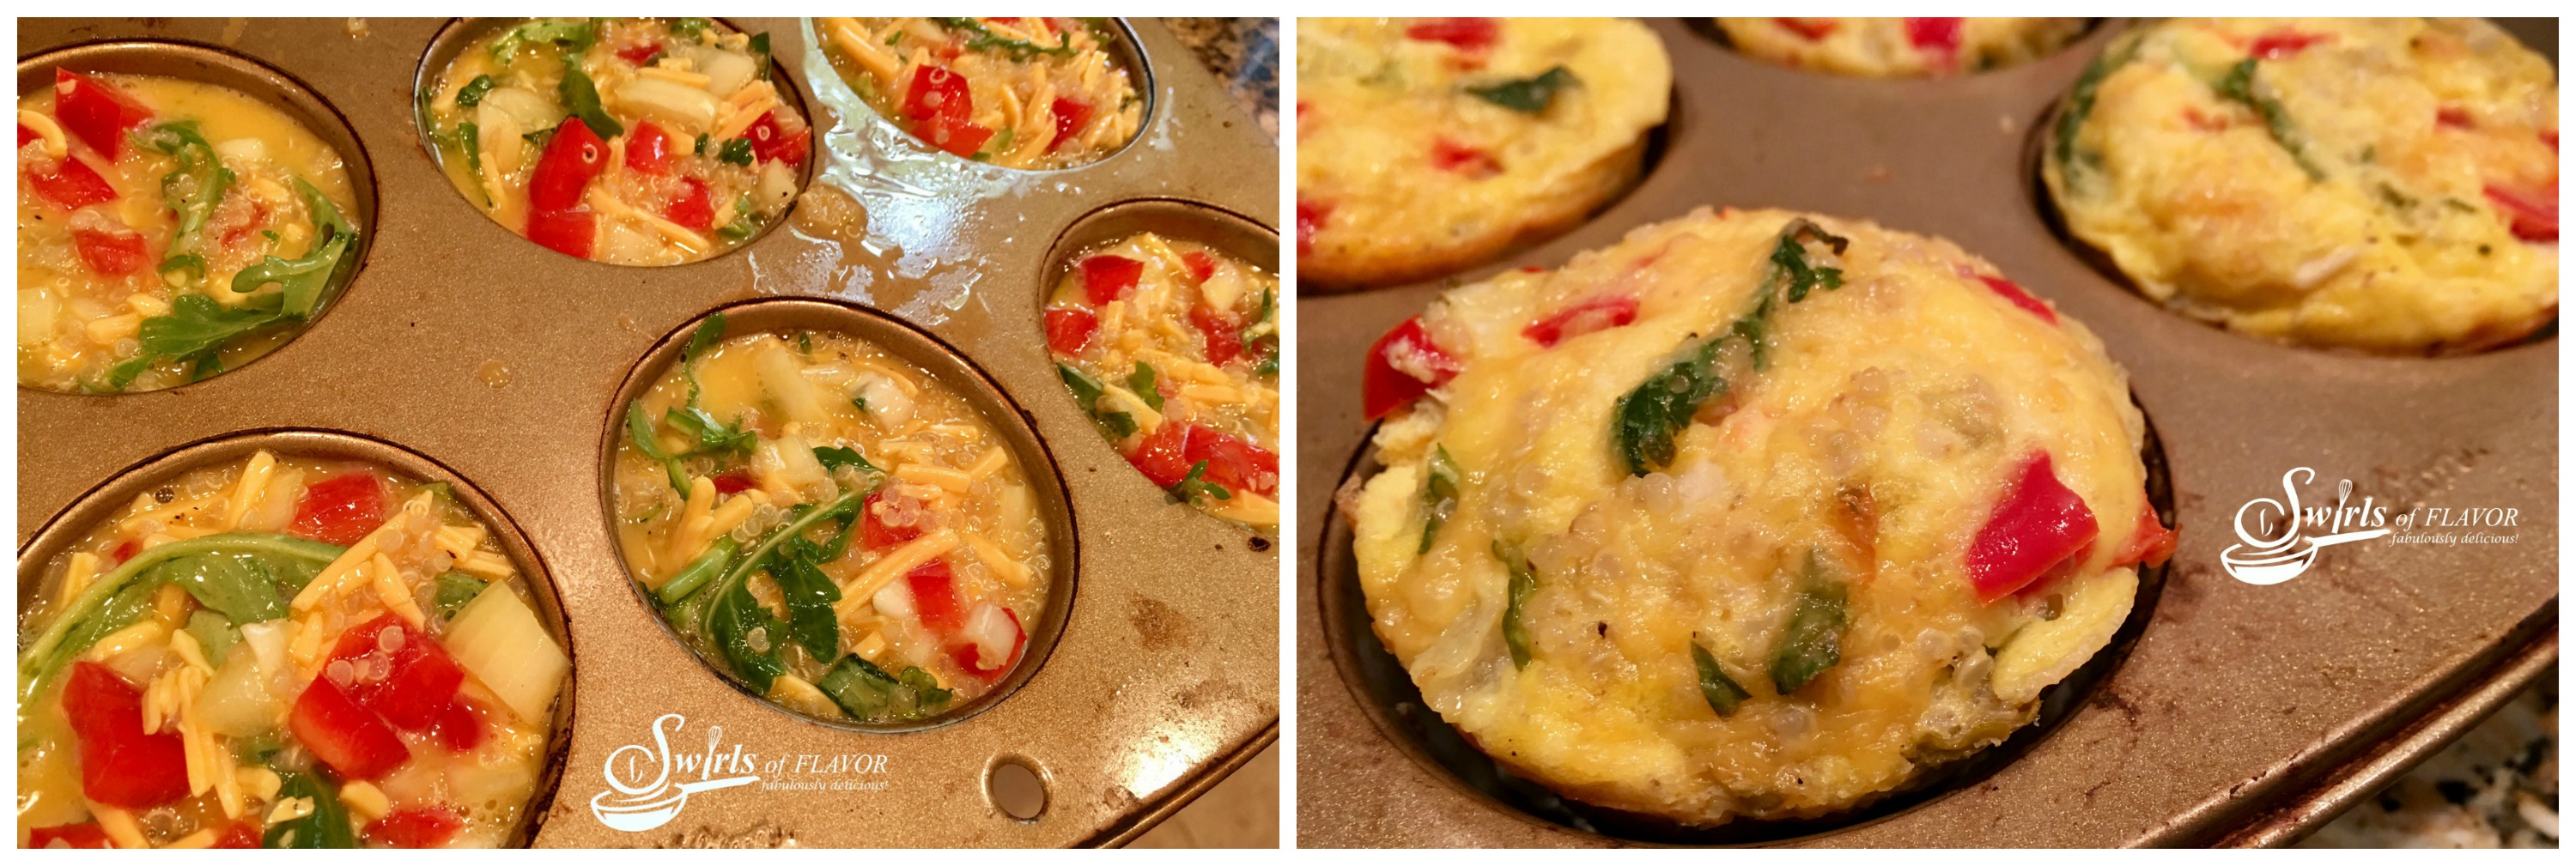 Filled with protein-packed quinoa and eggs and bursting with fresh vegetables, Quinoa Egg Muffins are the perfect start to any busy day. eggs | muffins | breakfast | red bell peppers | arugula | brunch | quinoa